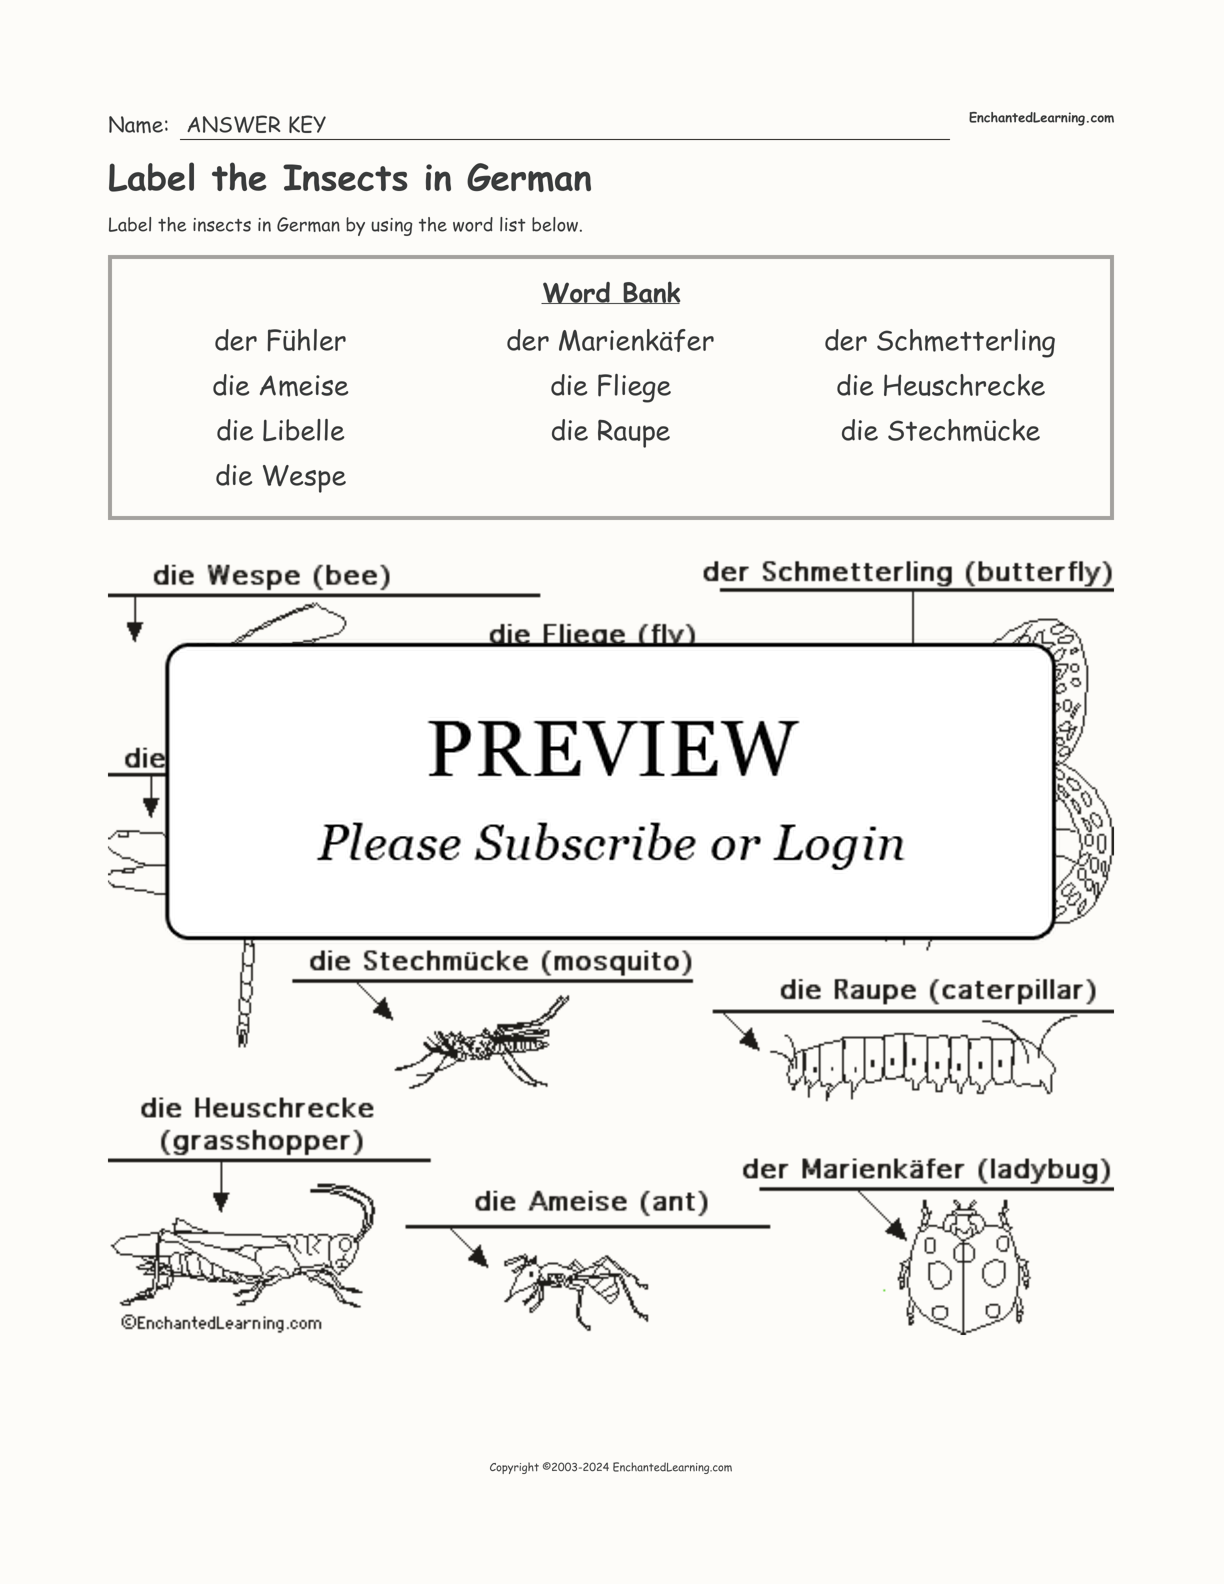 Label the Insects in German interactive worksheet page 2